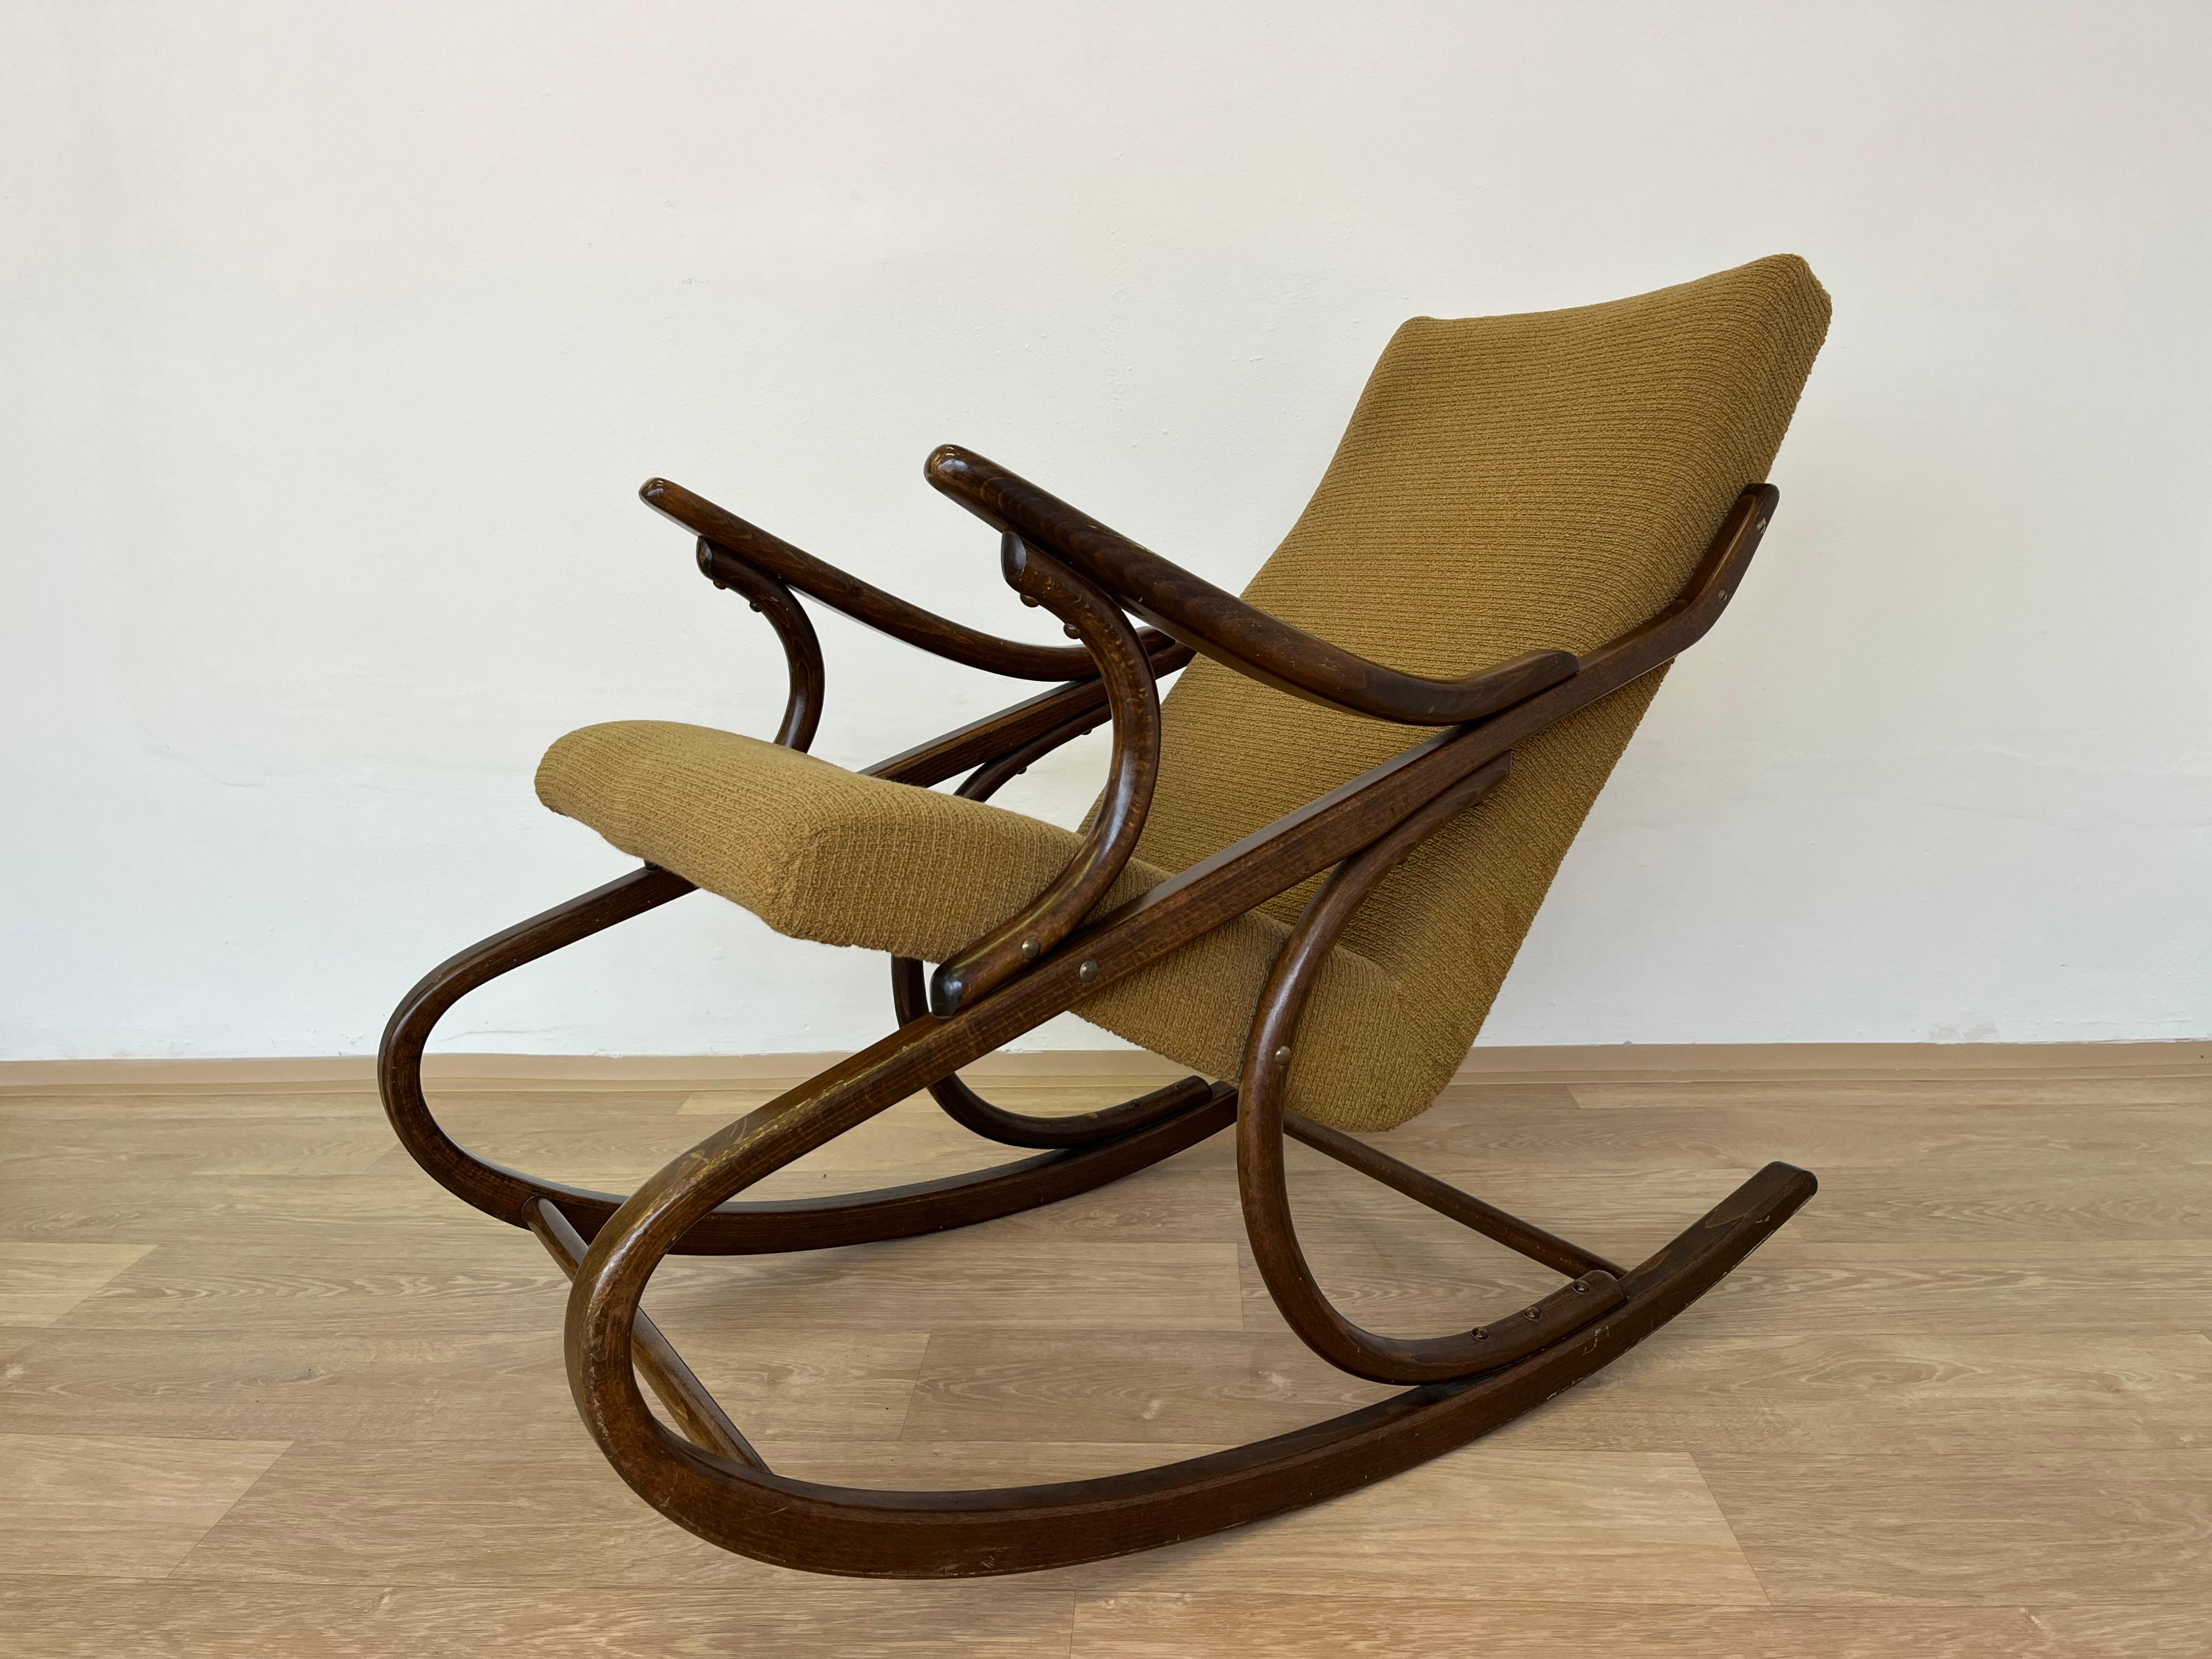 Czech Midcentury Design Rocking Chair by TON / Expo, 1958 For Sale